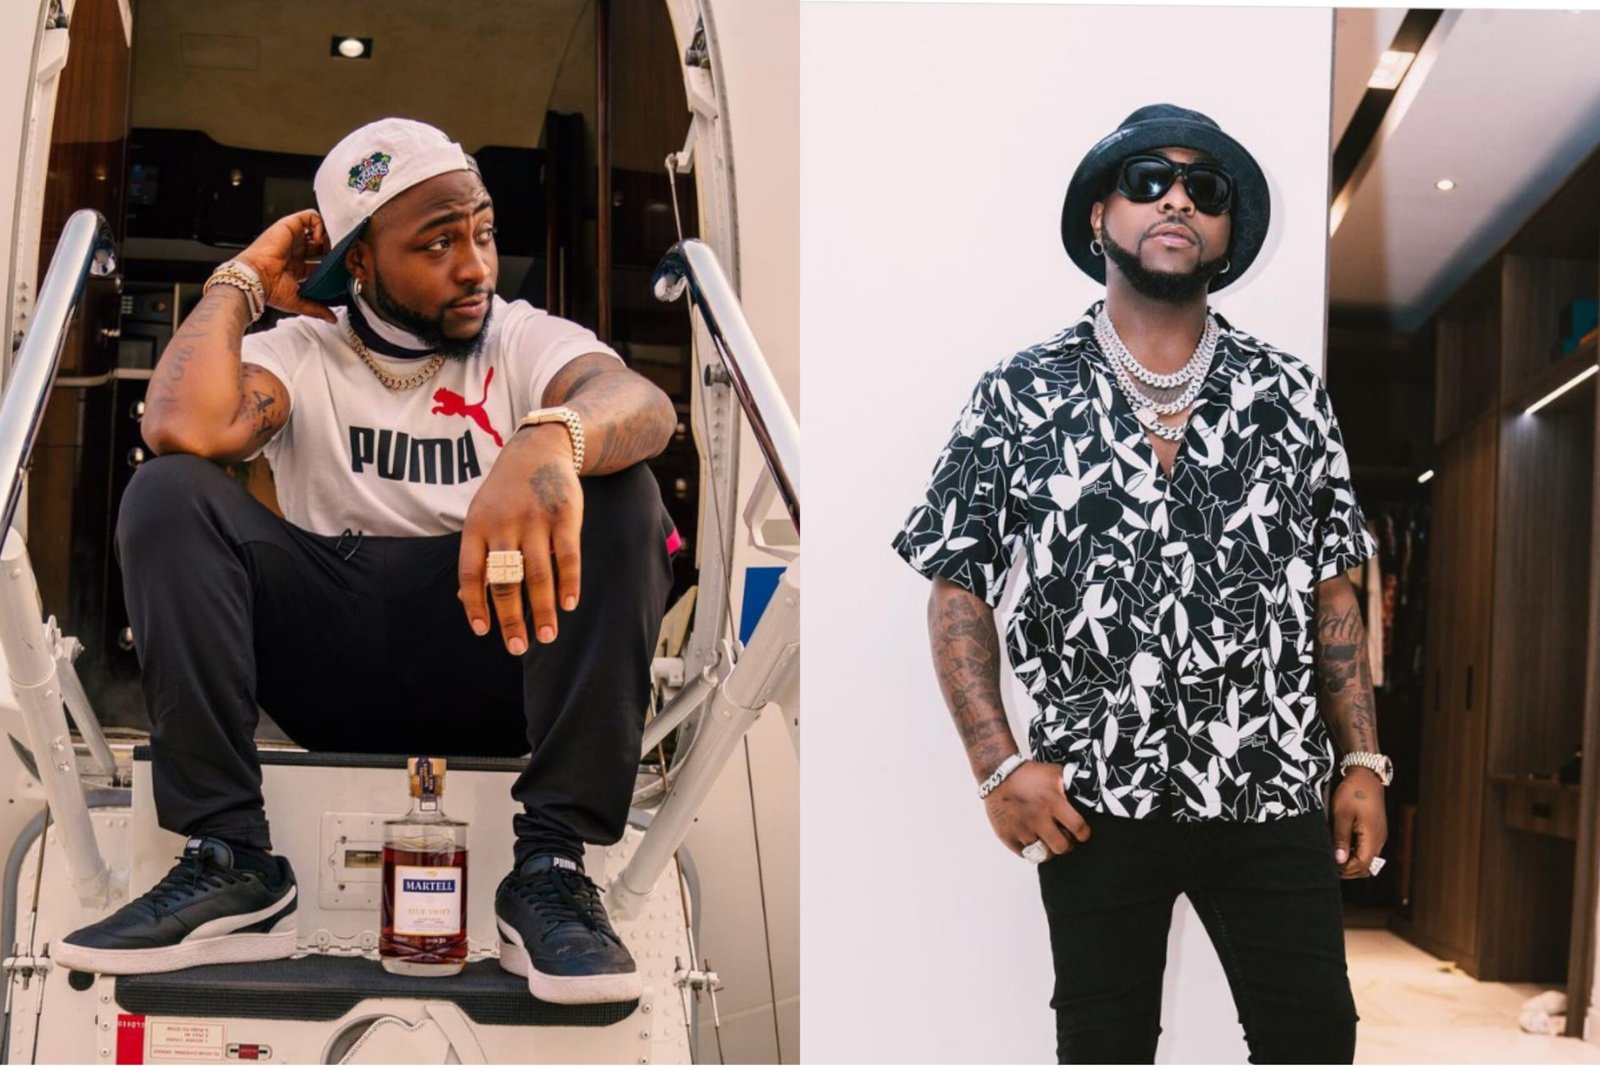 Davido cries out after calculating how much he spent on detty December alone